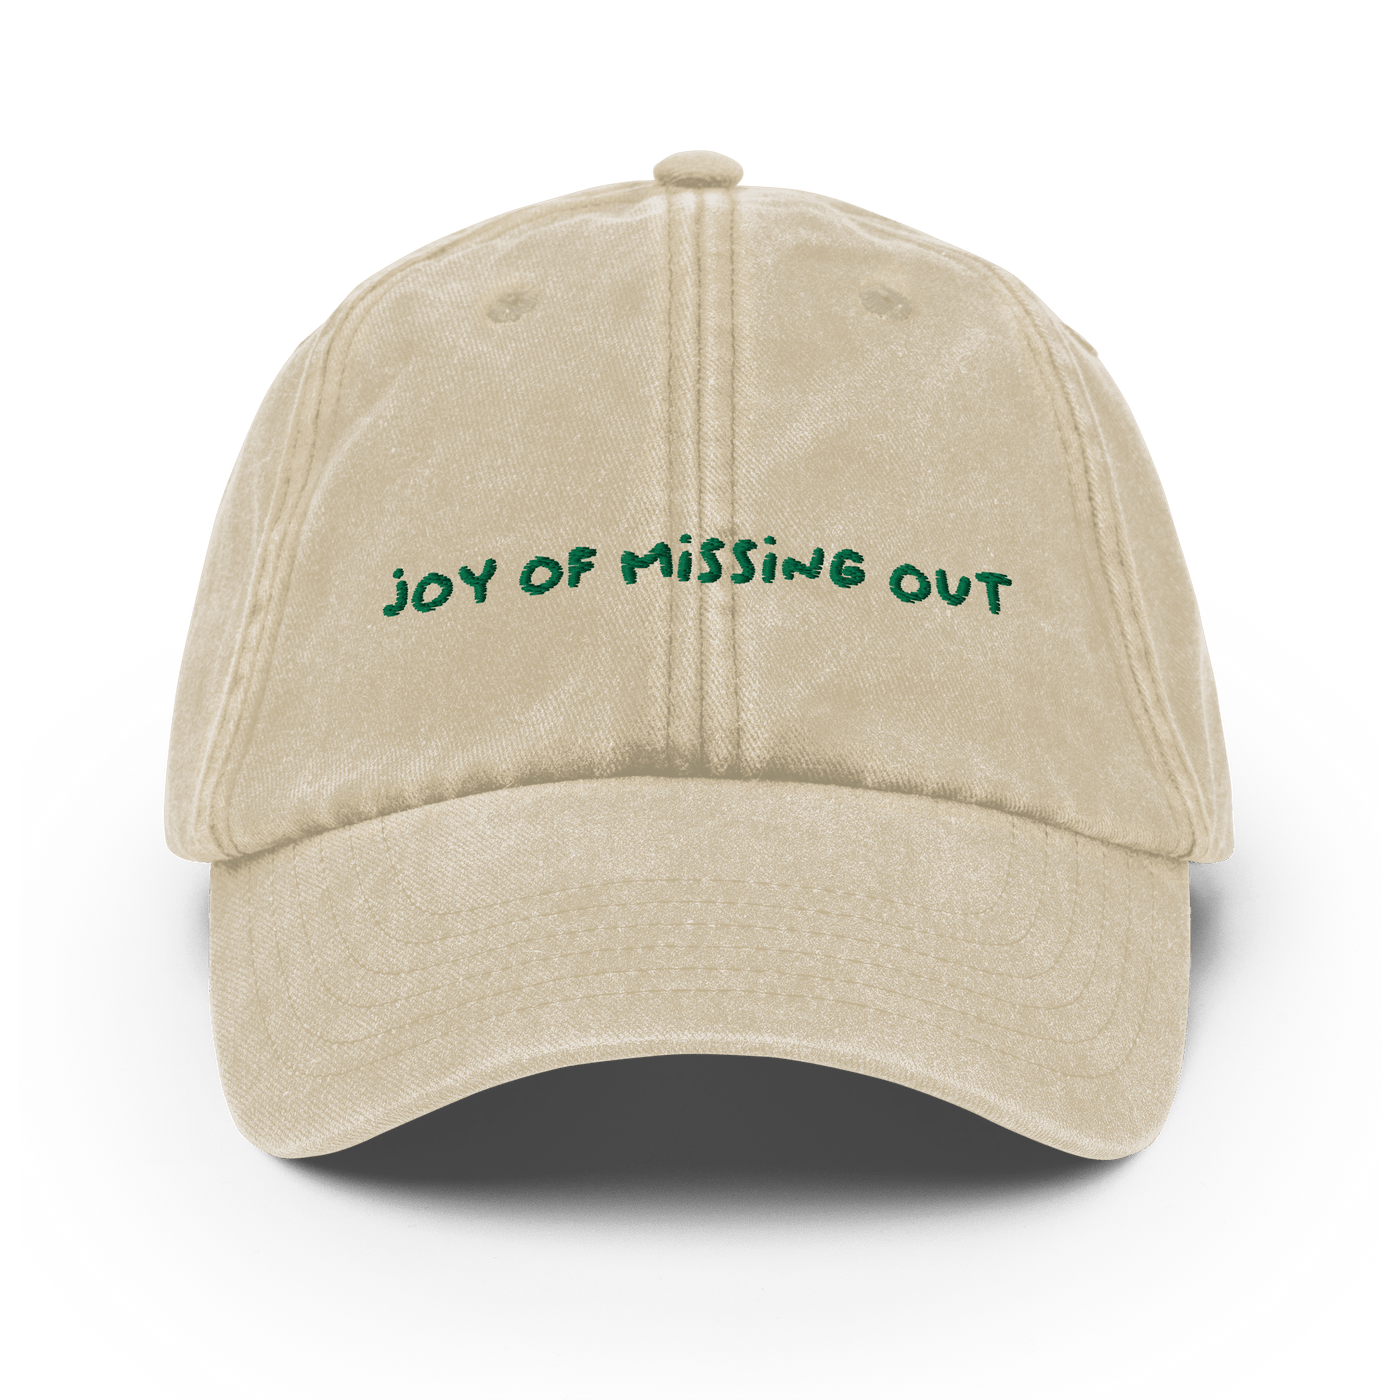 JOY OF MISSING OUT CUSTOM Vintage Hat - Vintage Stone - - Just Another Cap Store